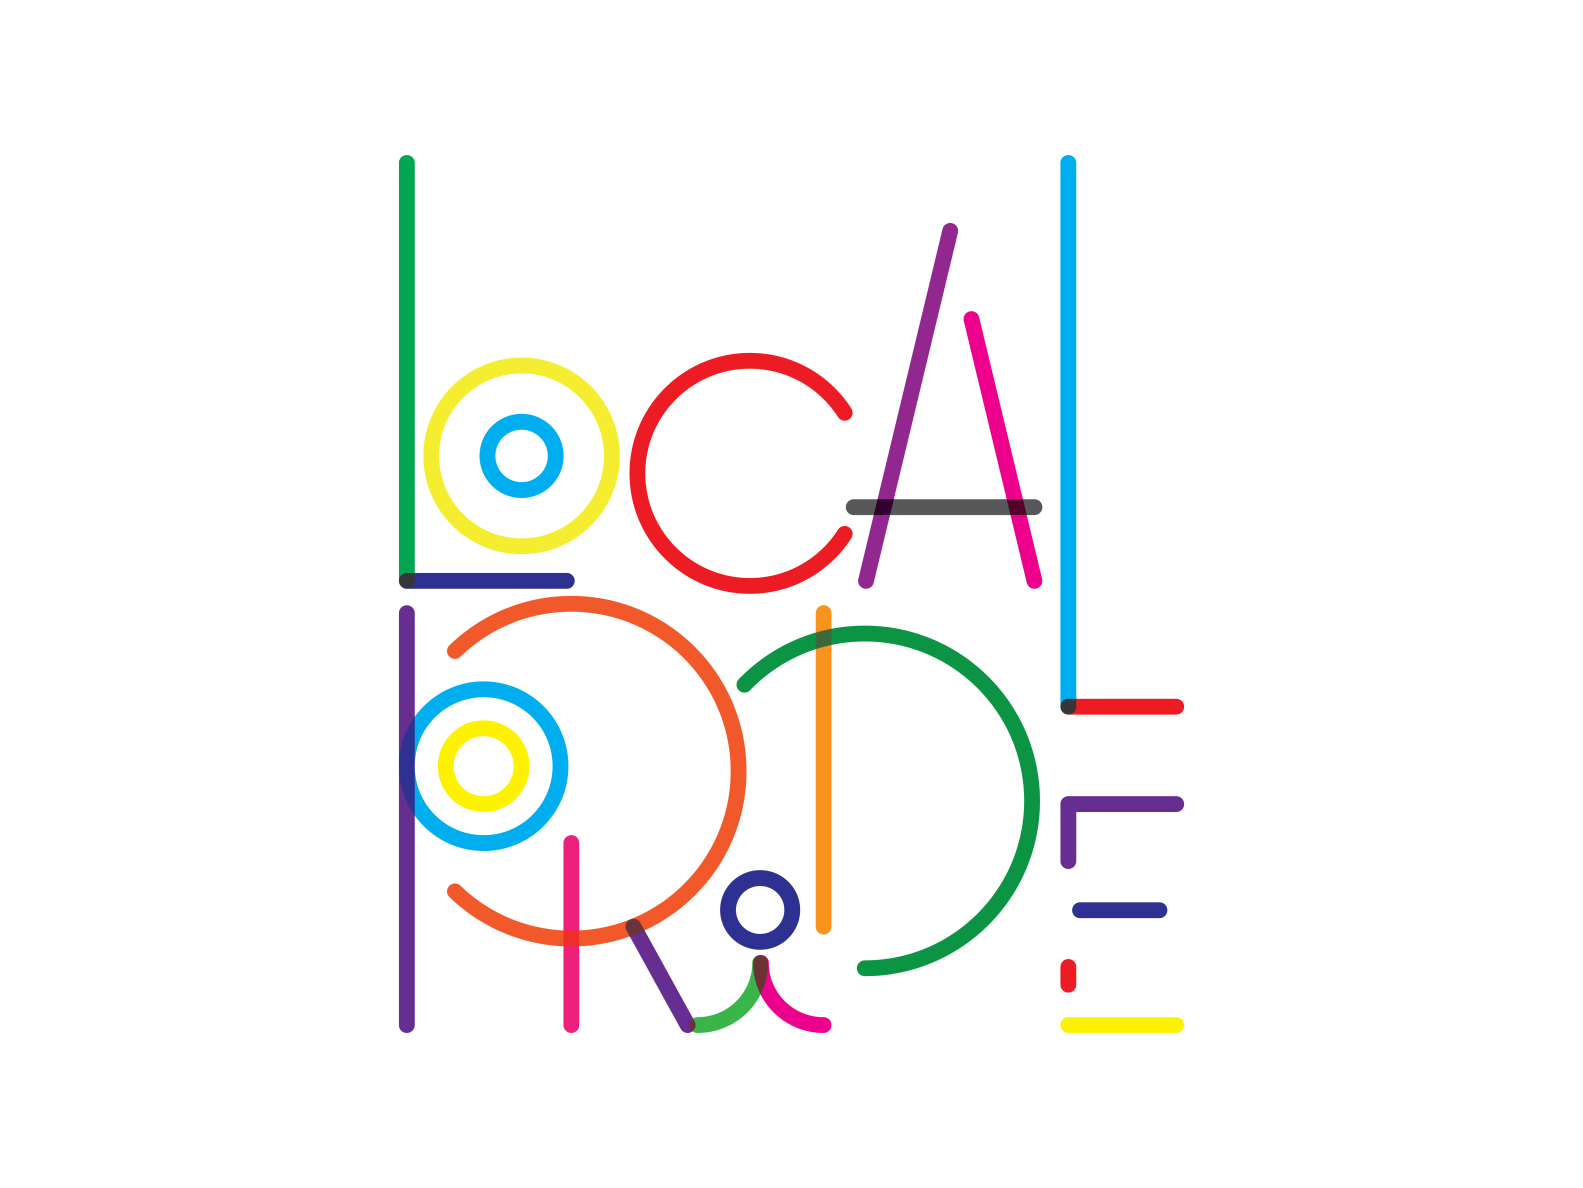 LOCAL PRIDE by Tubagus Iqbal on Dribbble